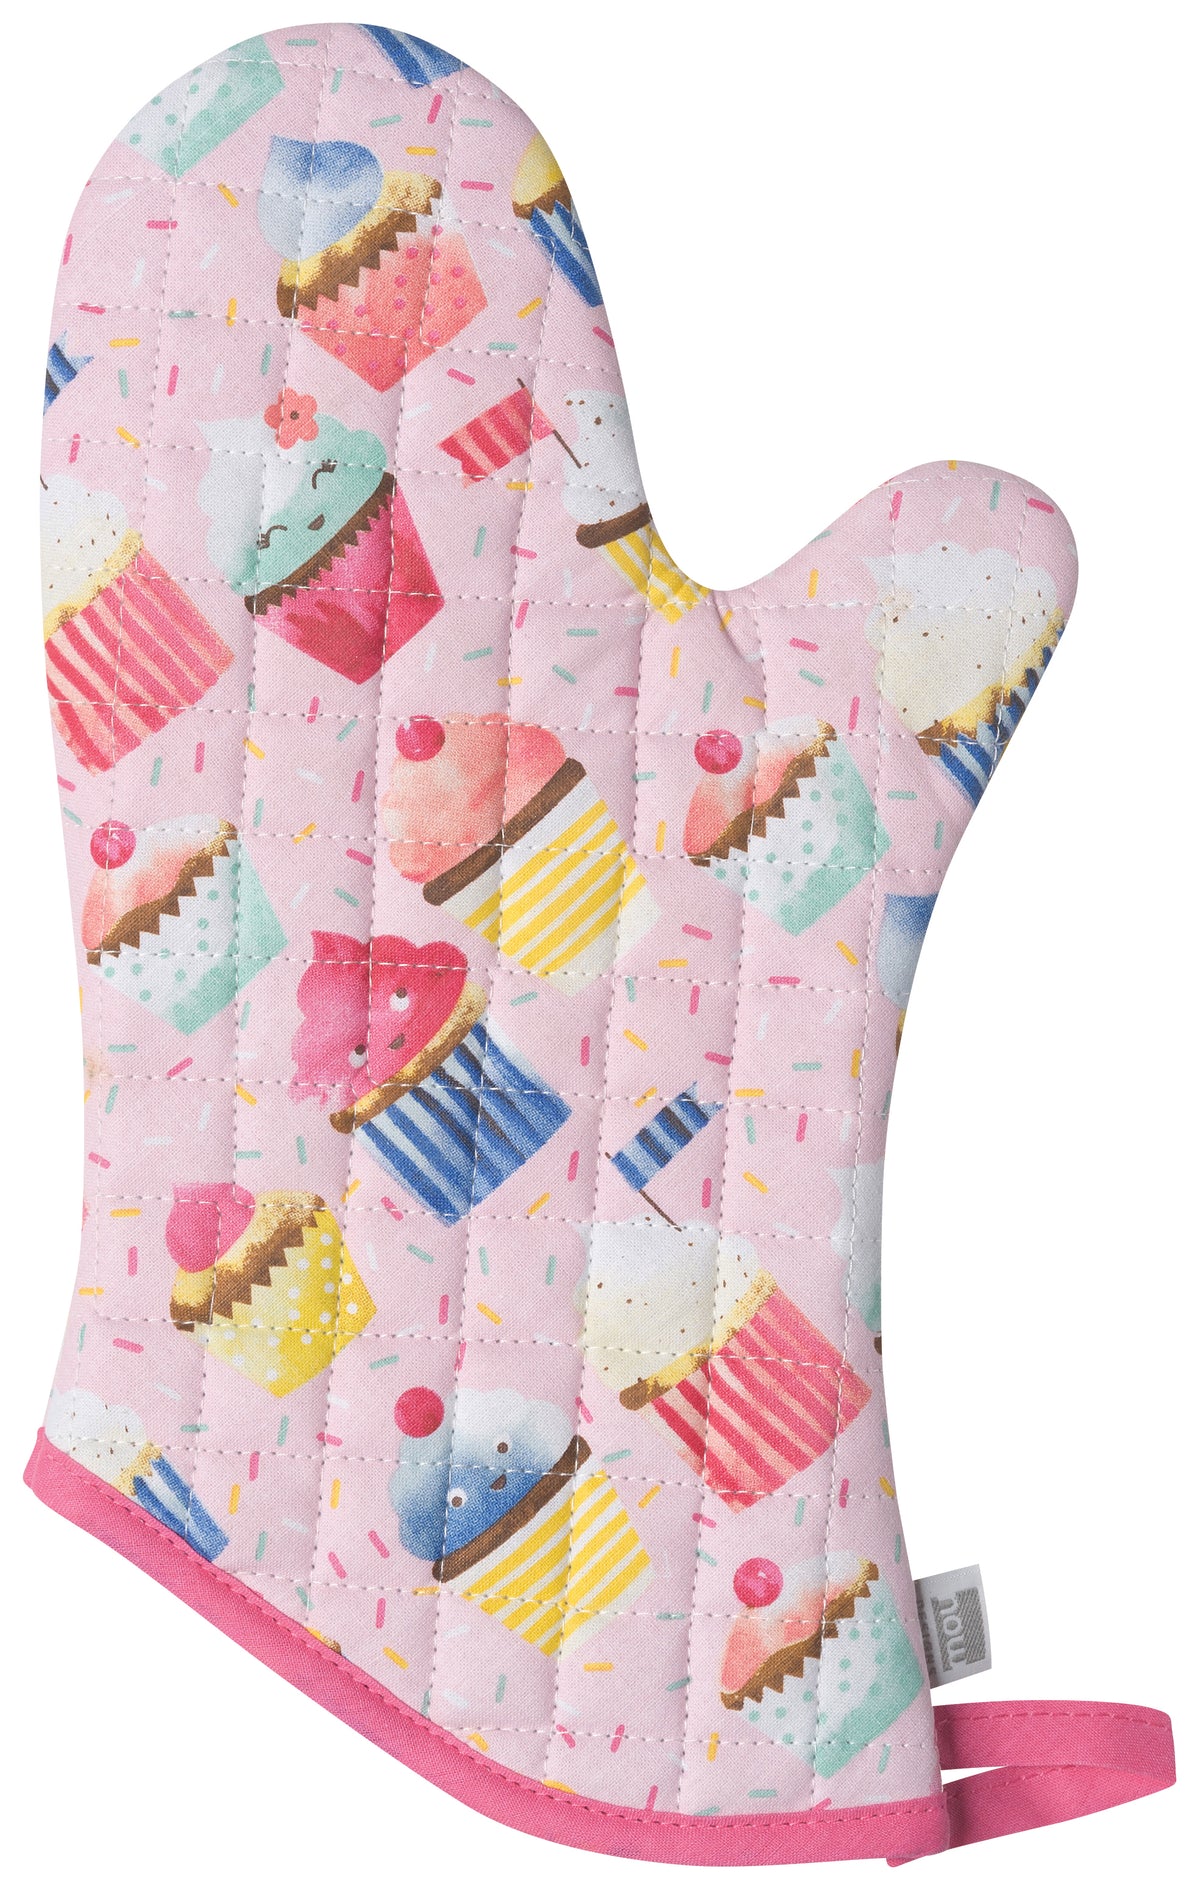 Oven Mitts - Patterned